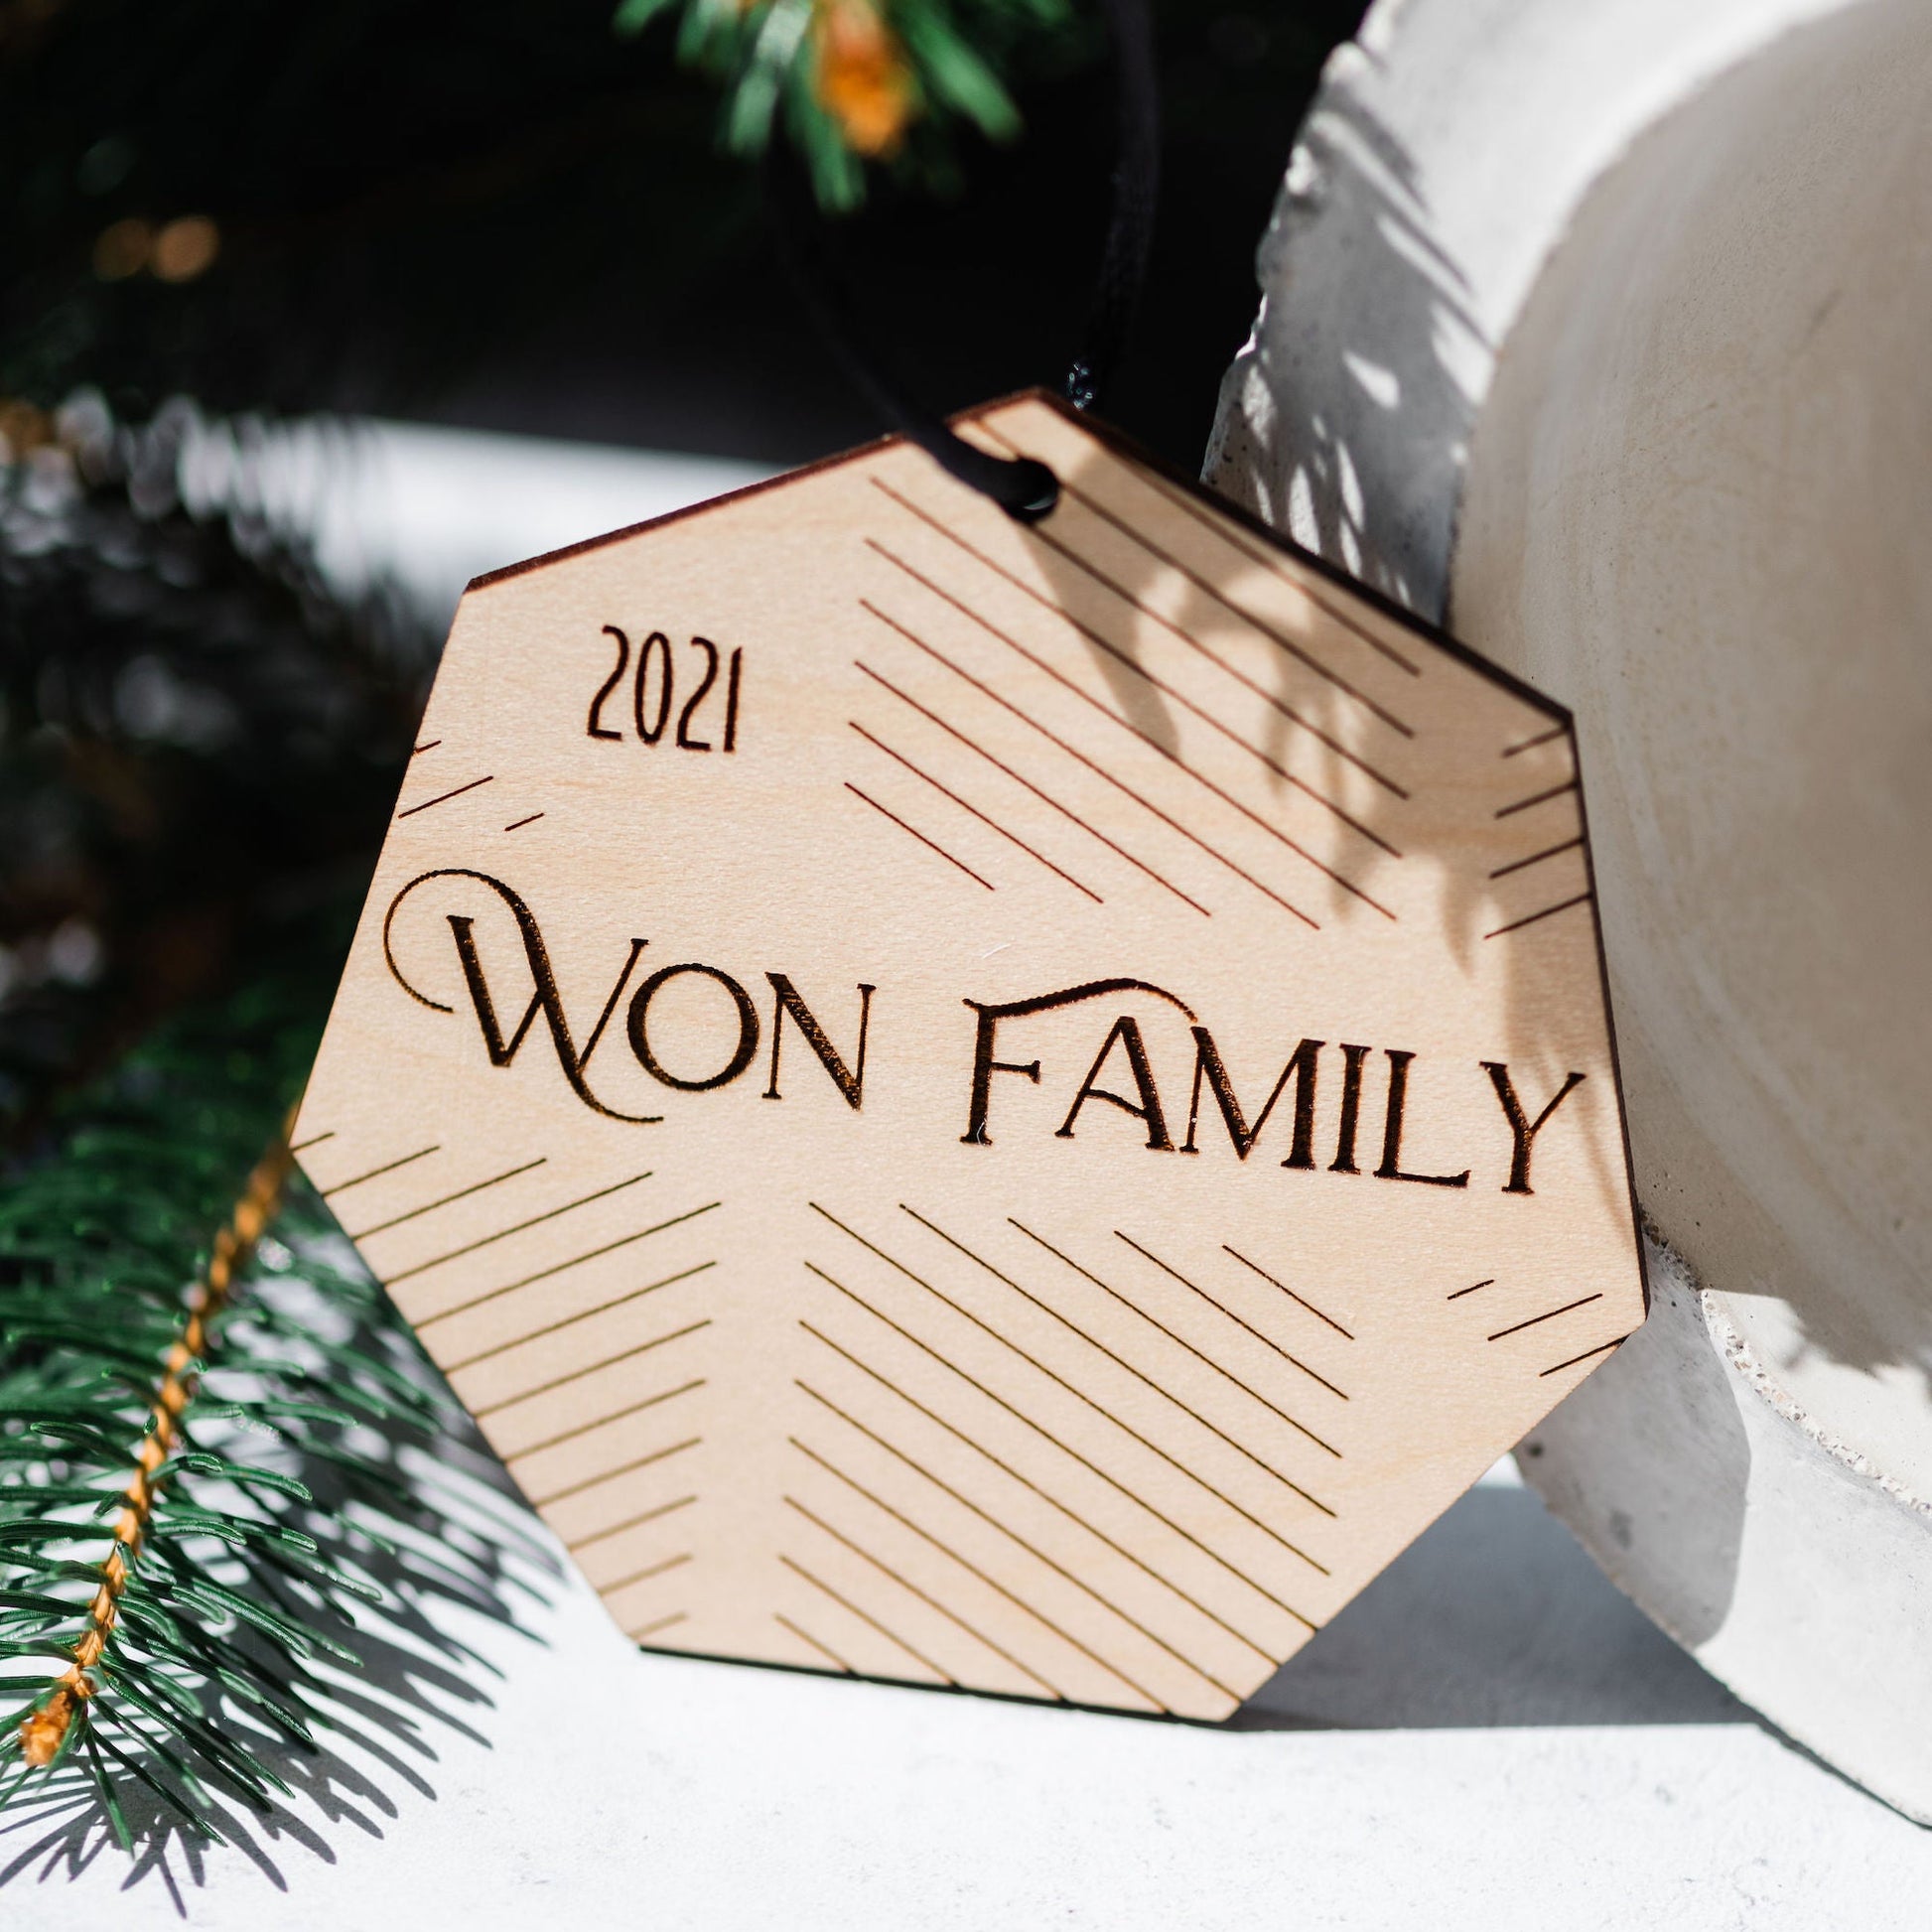 Custom Wood Ornaments: Heptagon Lines - Laser Cut and Laser Engraved Maple Wood by LeeMo Designs in Bend, Oregon